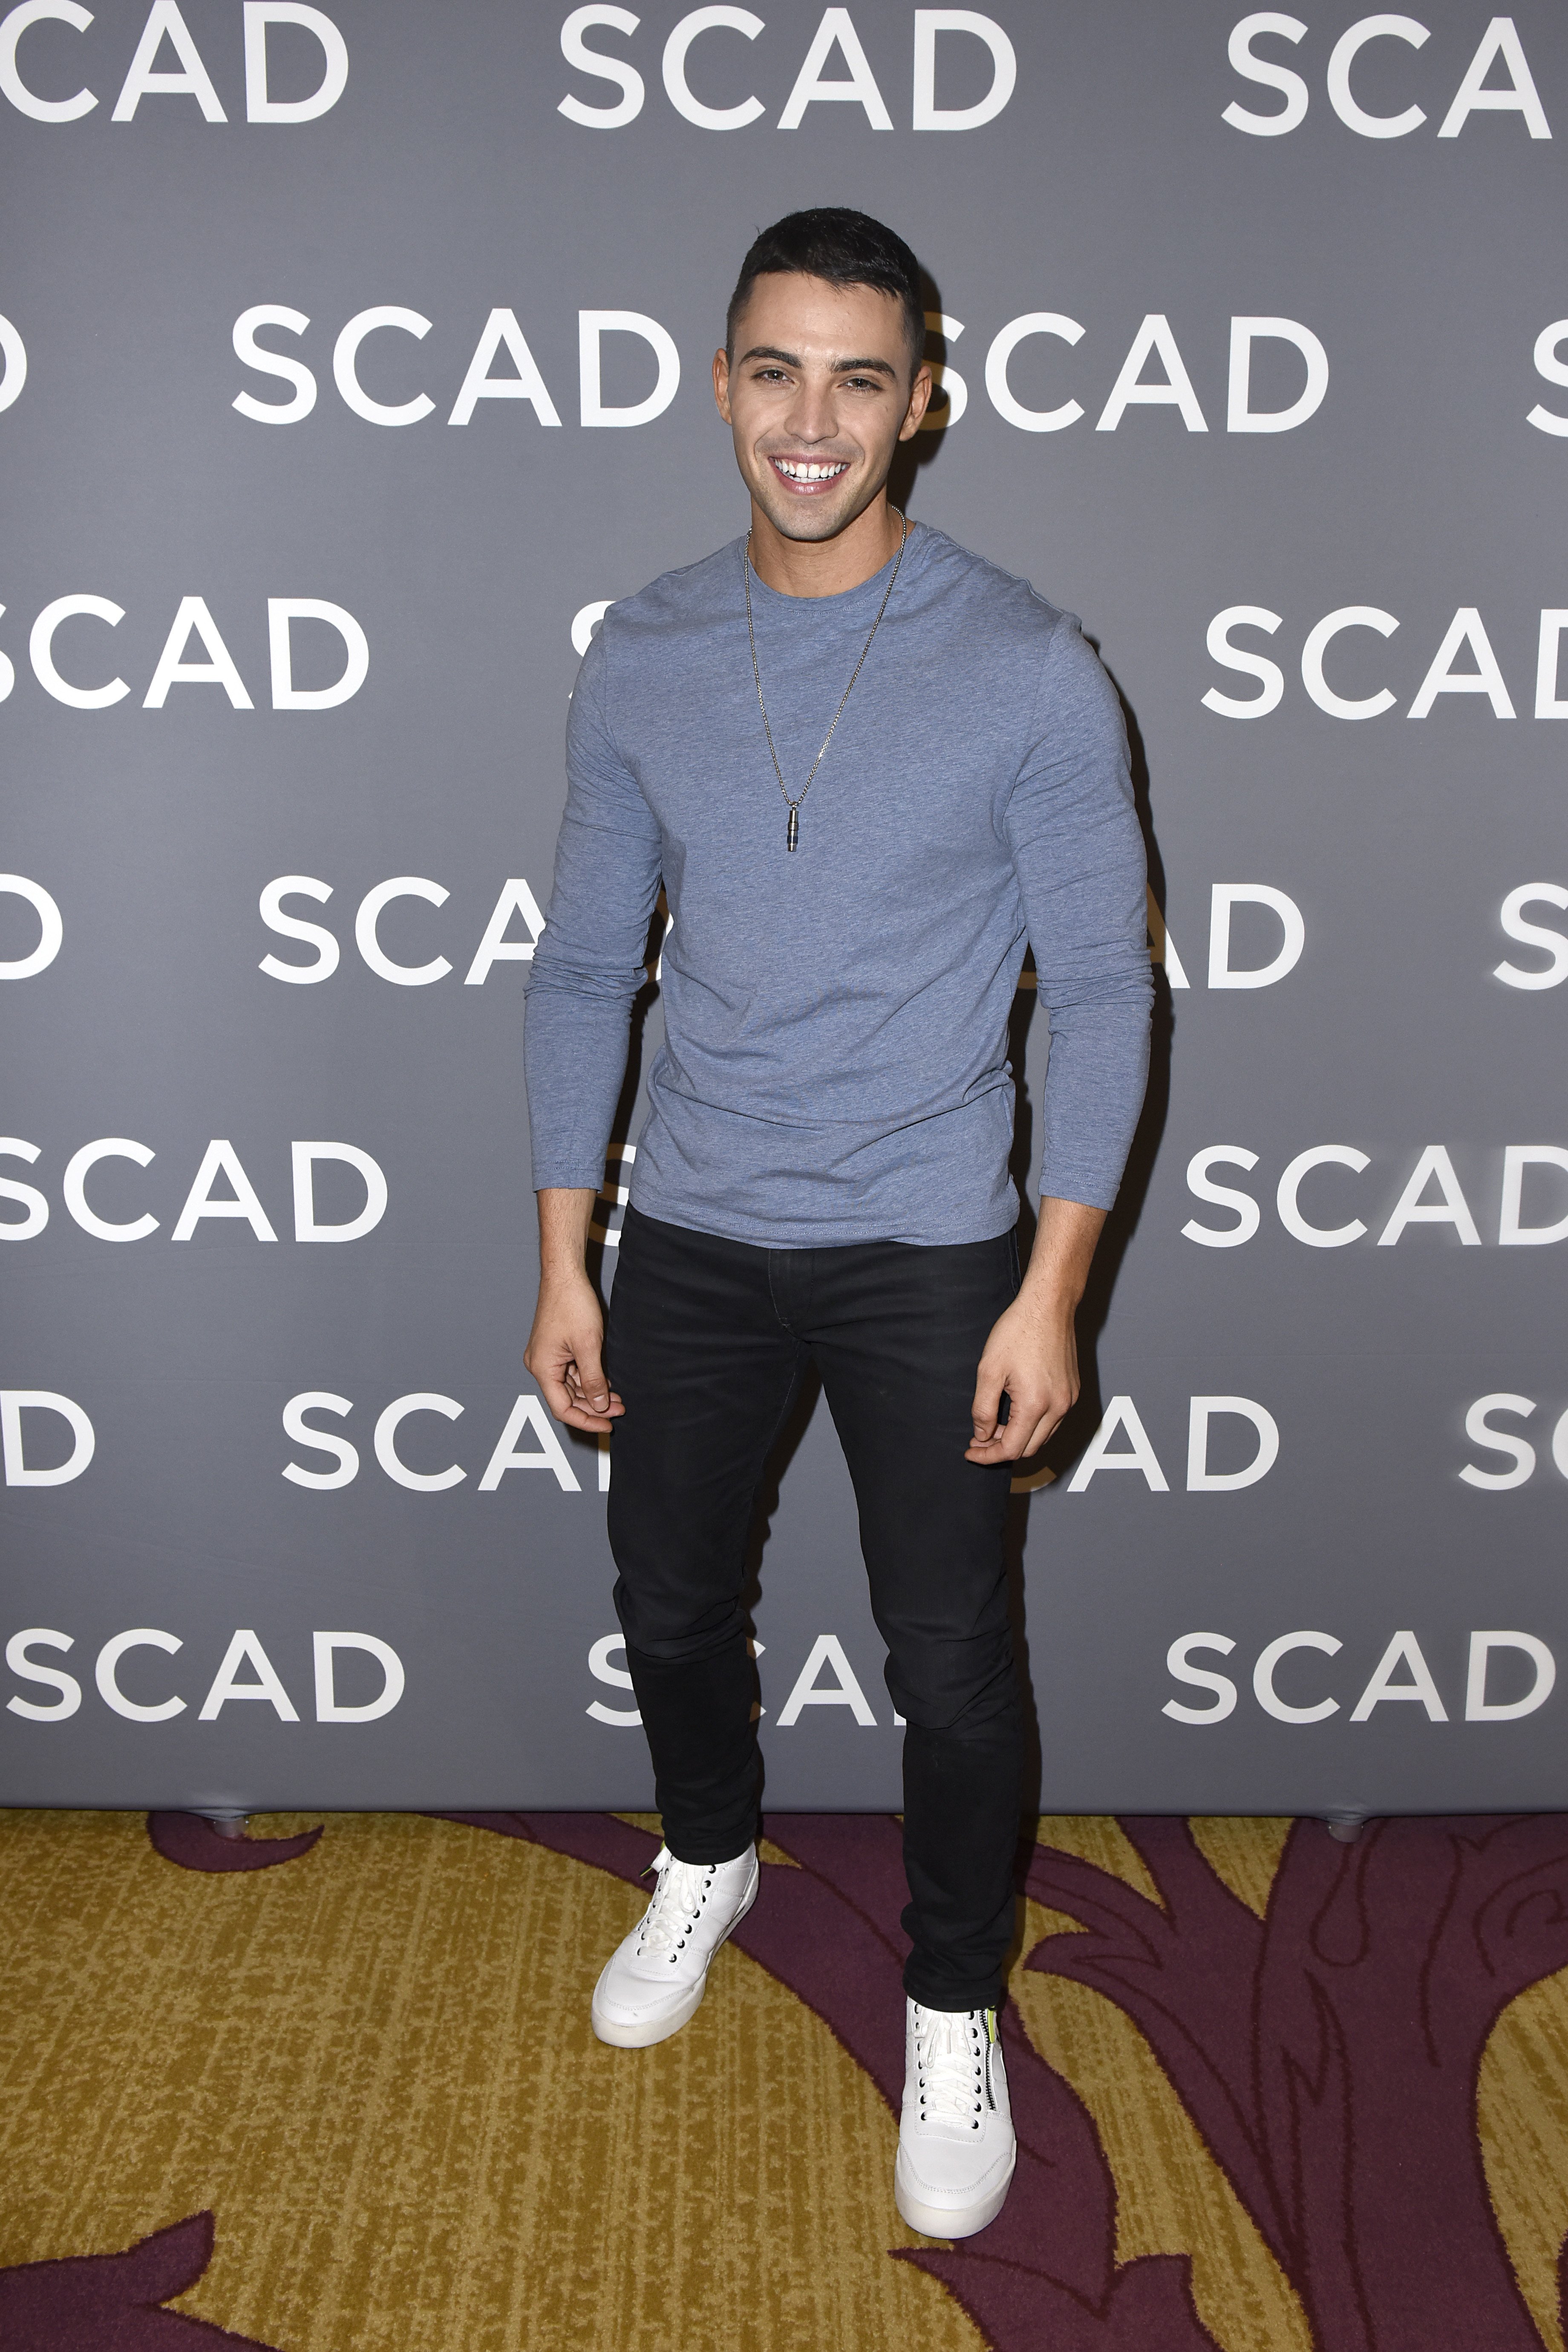 Benjamin Levy Aguilar at the SCAD aTVfest 2020 in Atlanta on February 27, 2020 | Source: Getty Images